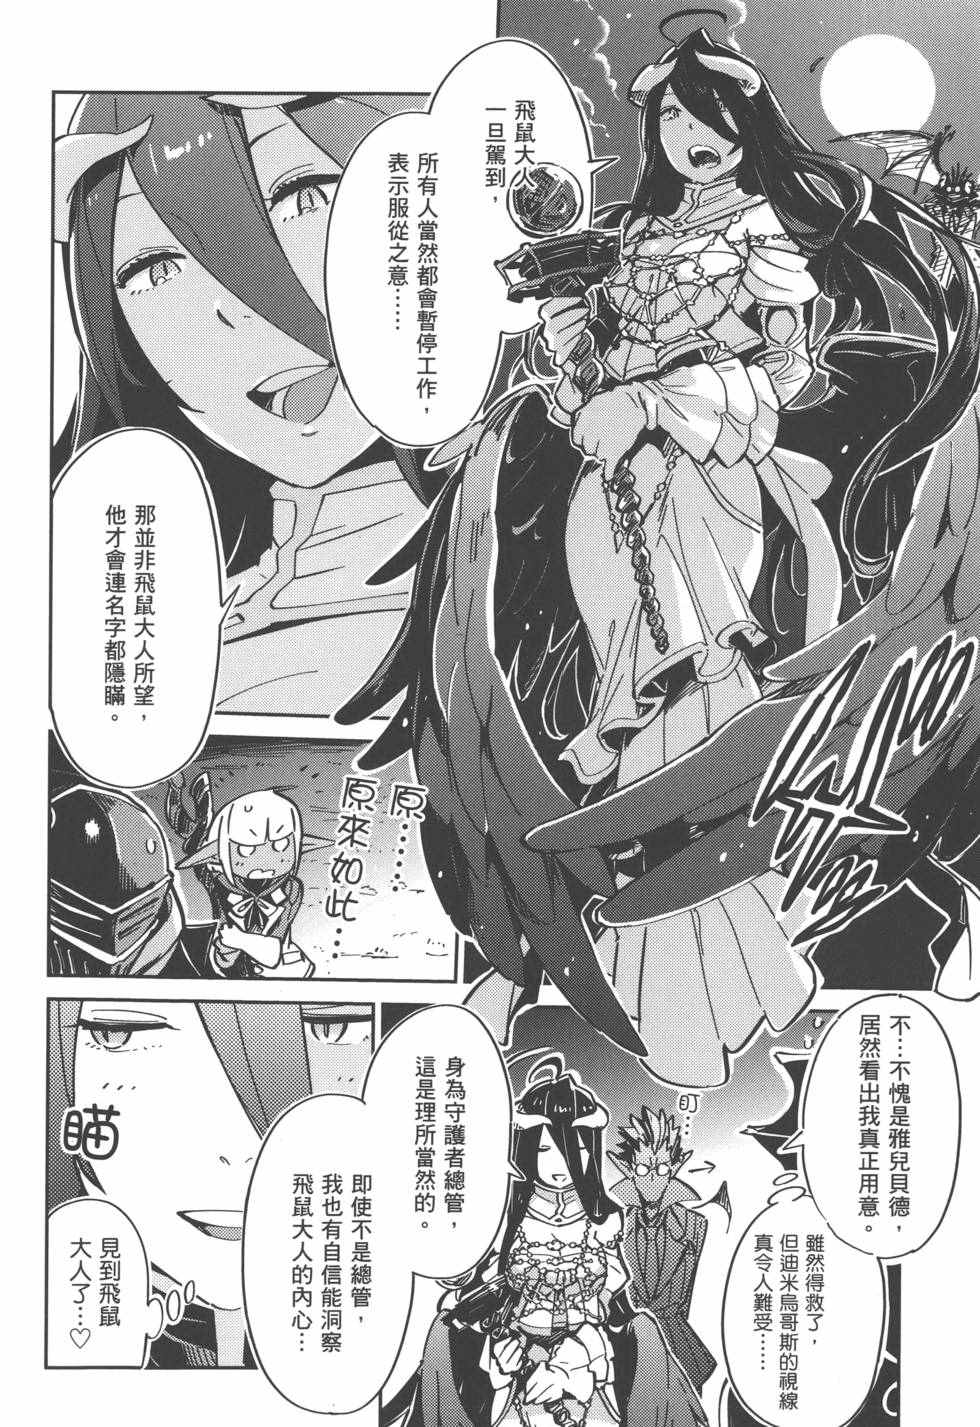 OVERLORD - 第1卷(2/4) - 2